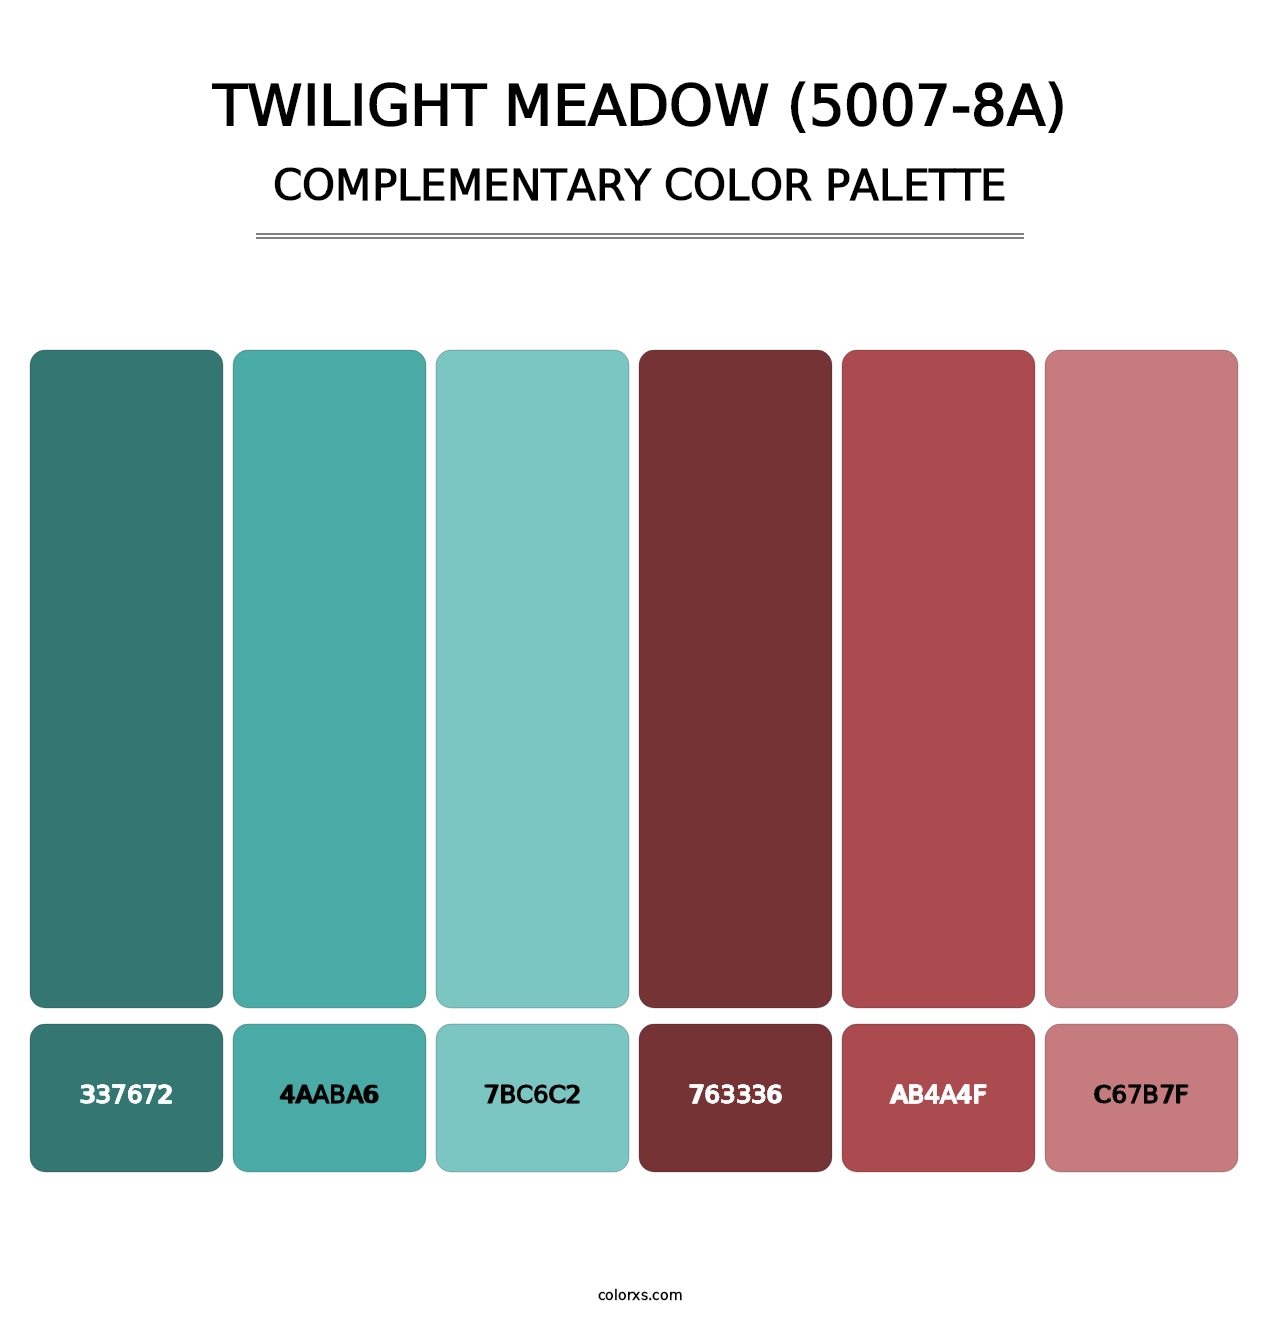 Twilight Meadow (5007-8A) - Complementary Color Palette